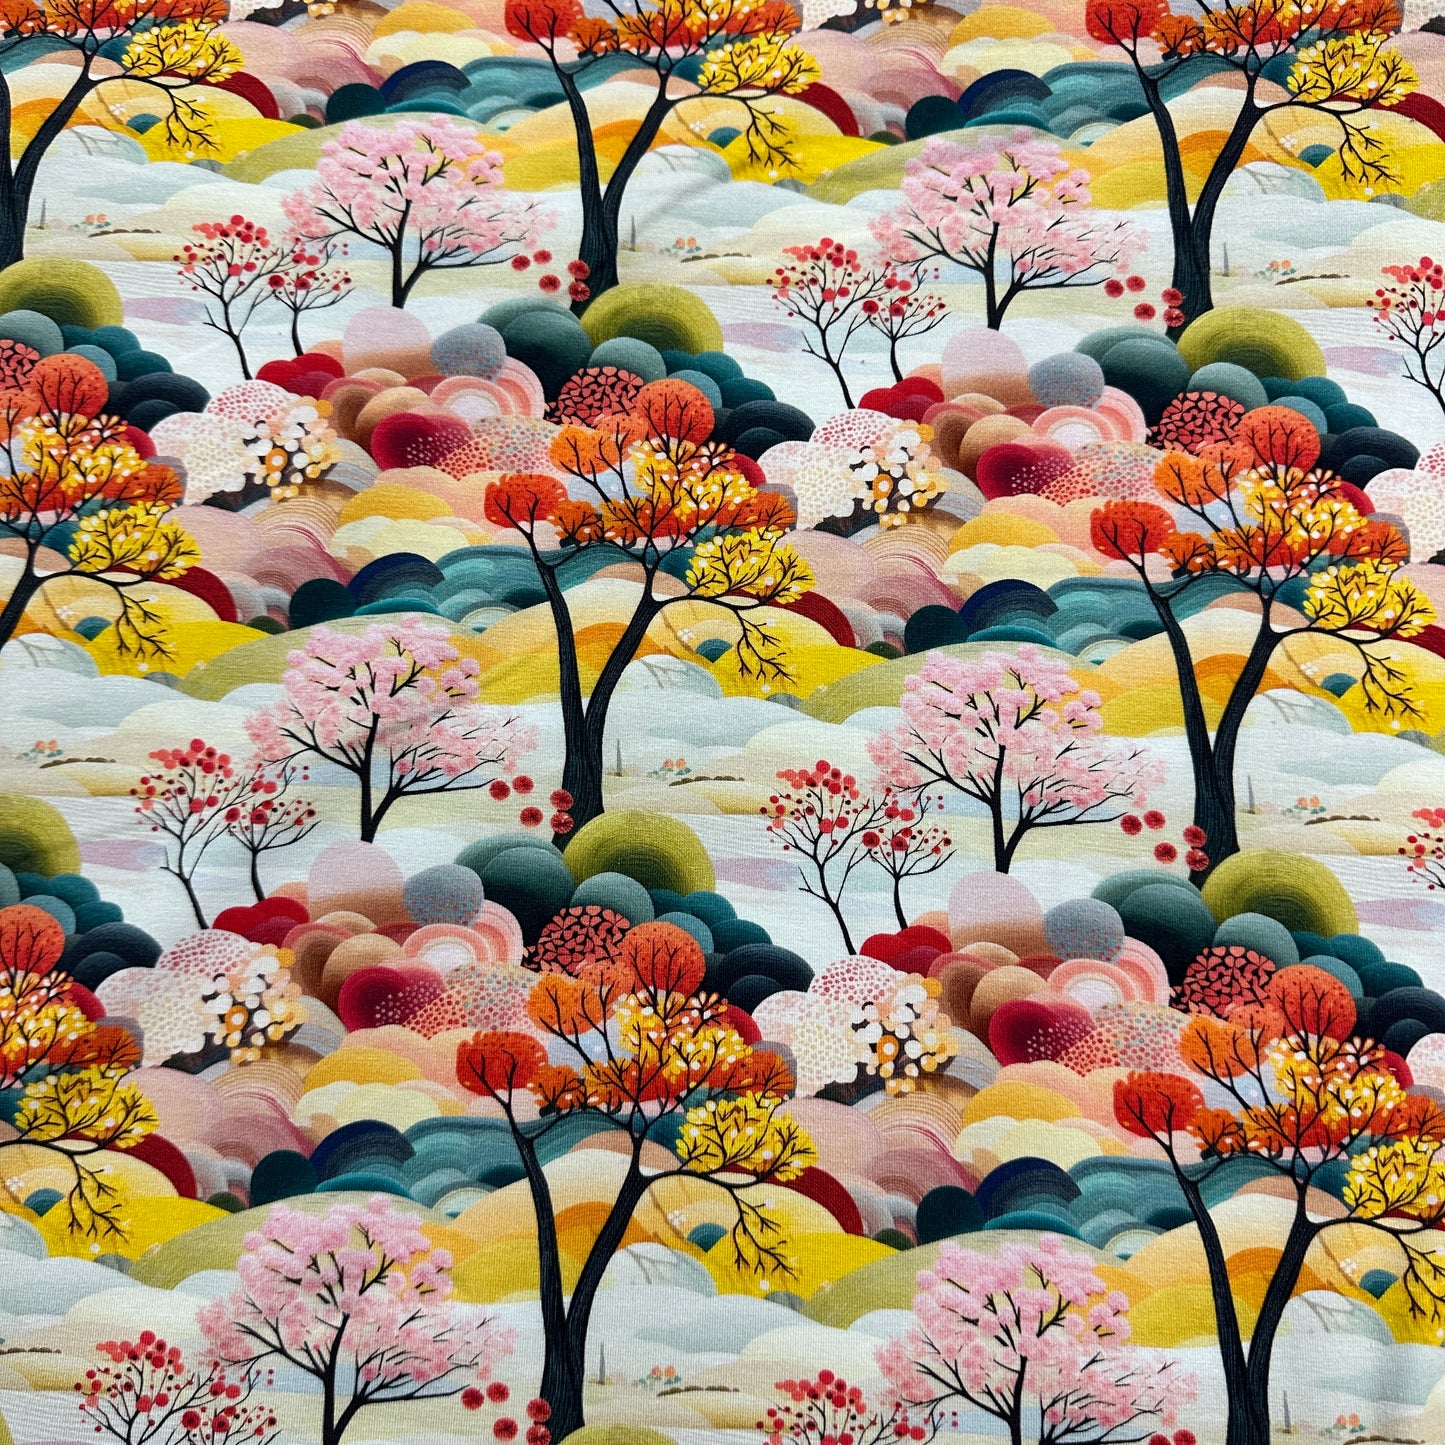 Colorful Natural Murals on Bamboo/Spandex Jersey Fabric